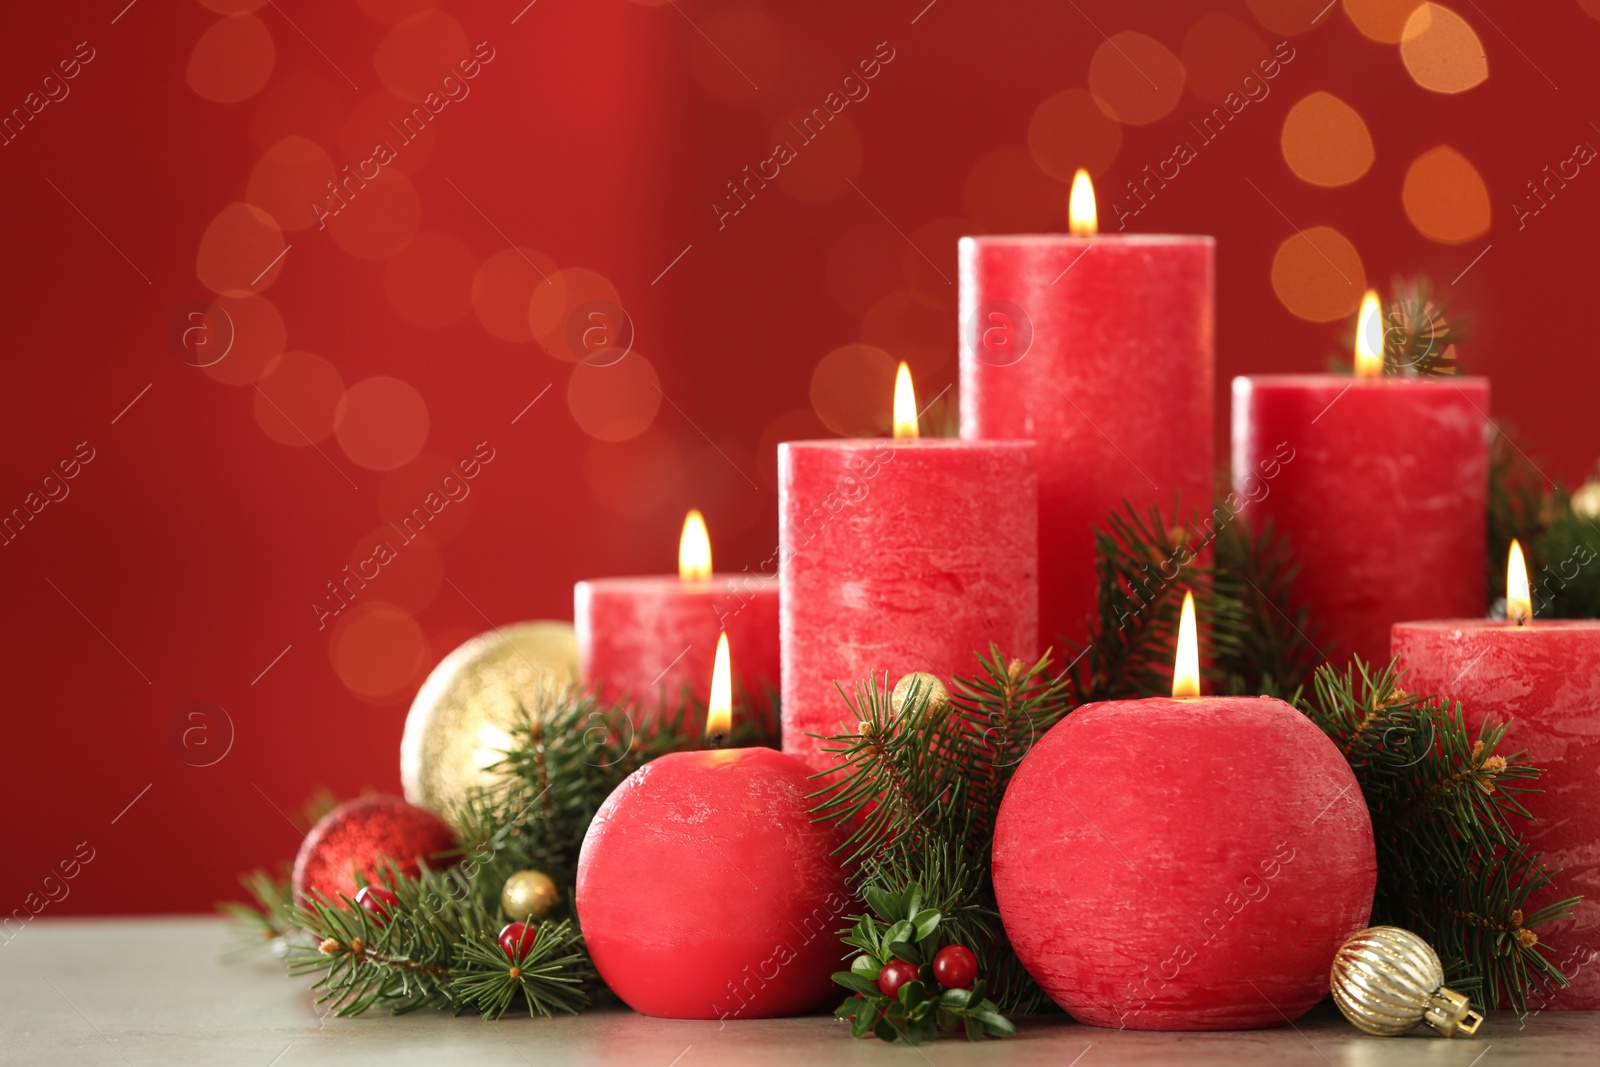 Photo of Burning candles and Christmas decor on table against red background with bokeh effect